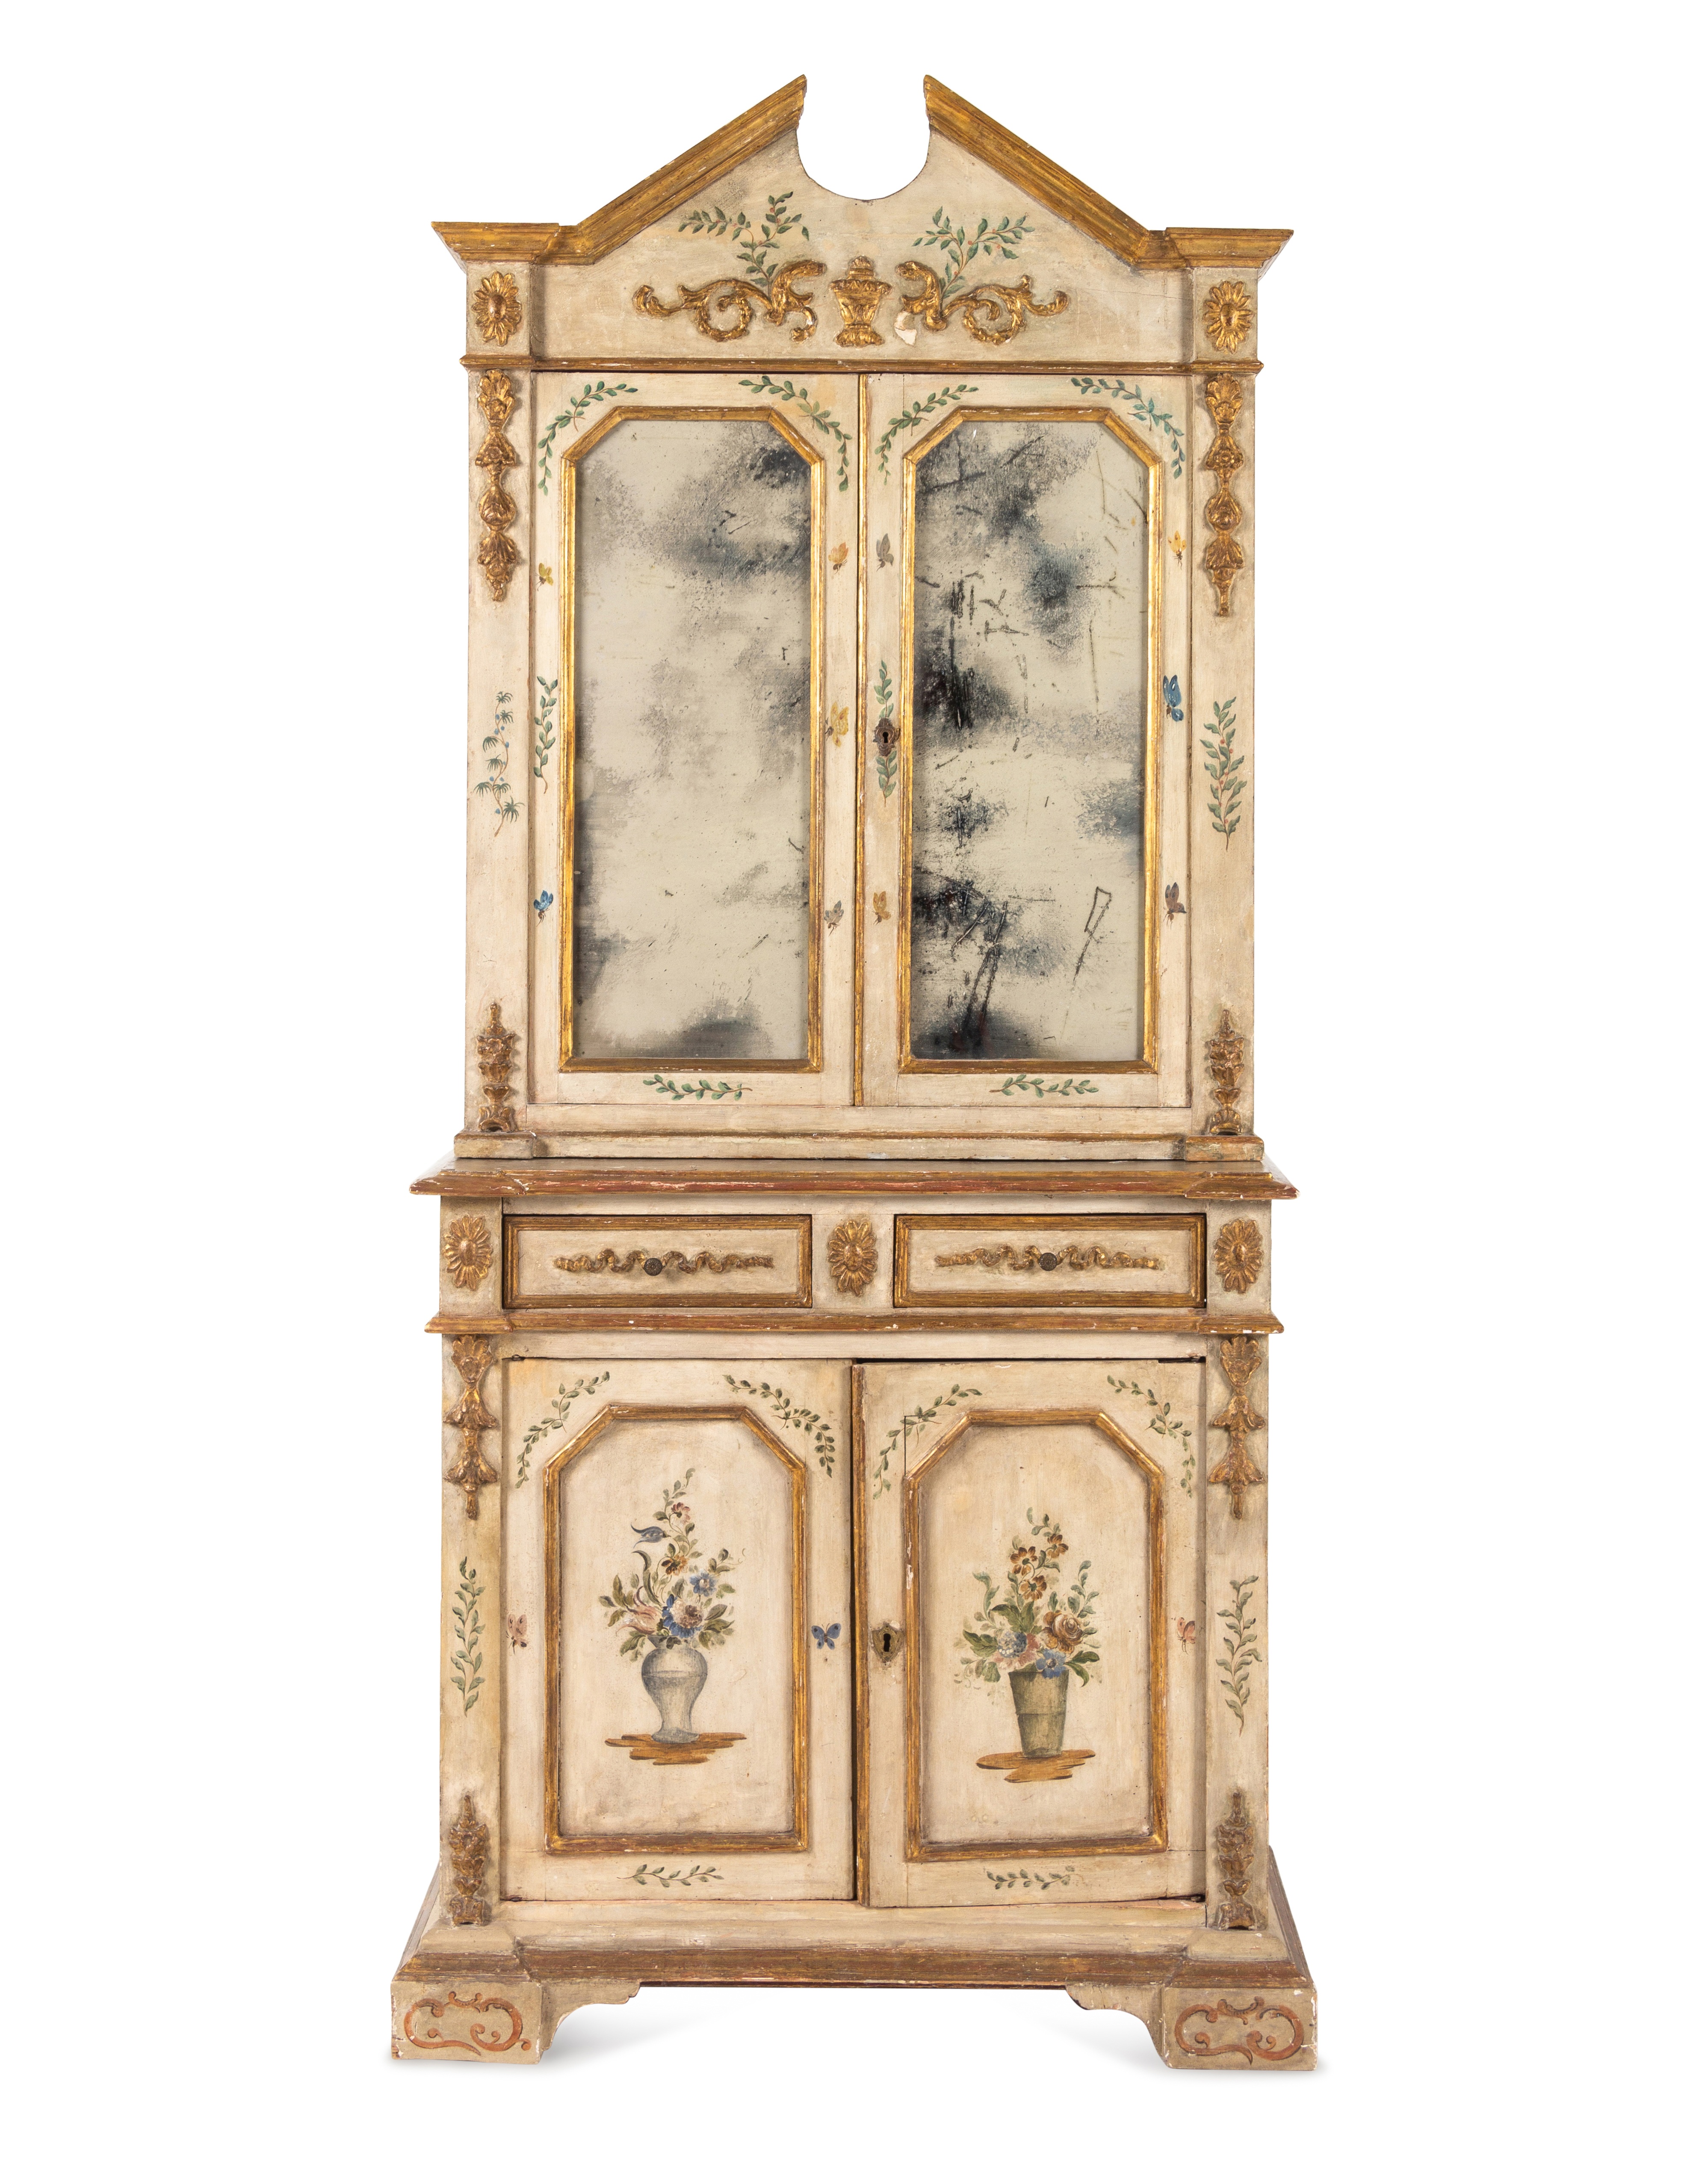 An Italian Polychrome and Cream-Painted and Parcel-Gilt Cabinet - Image 2 of 15